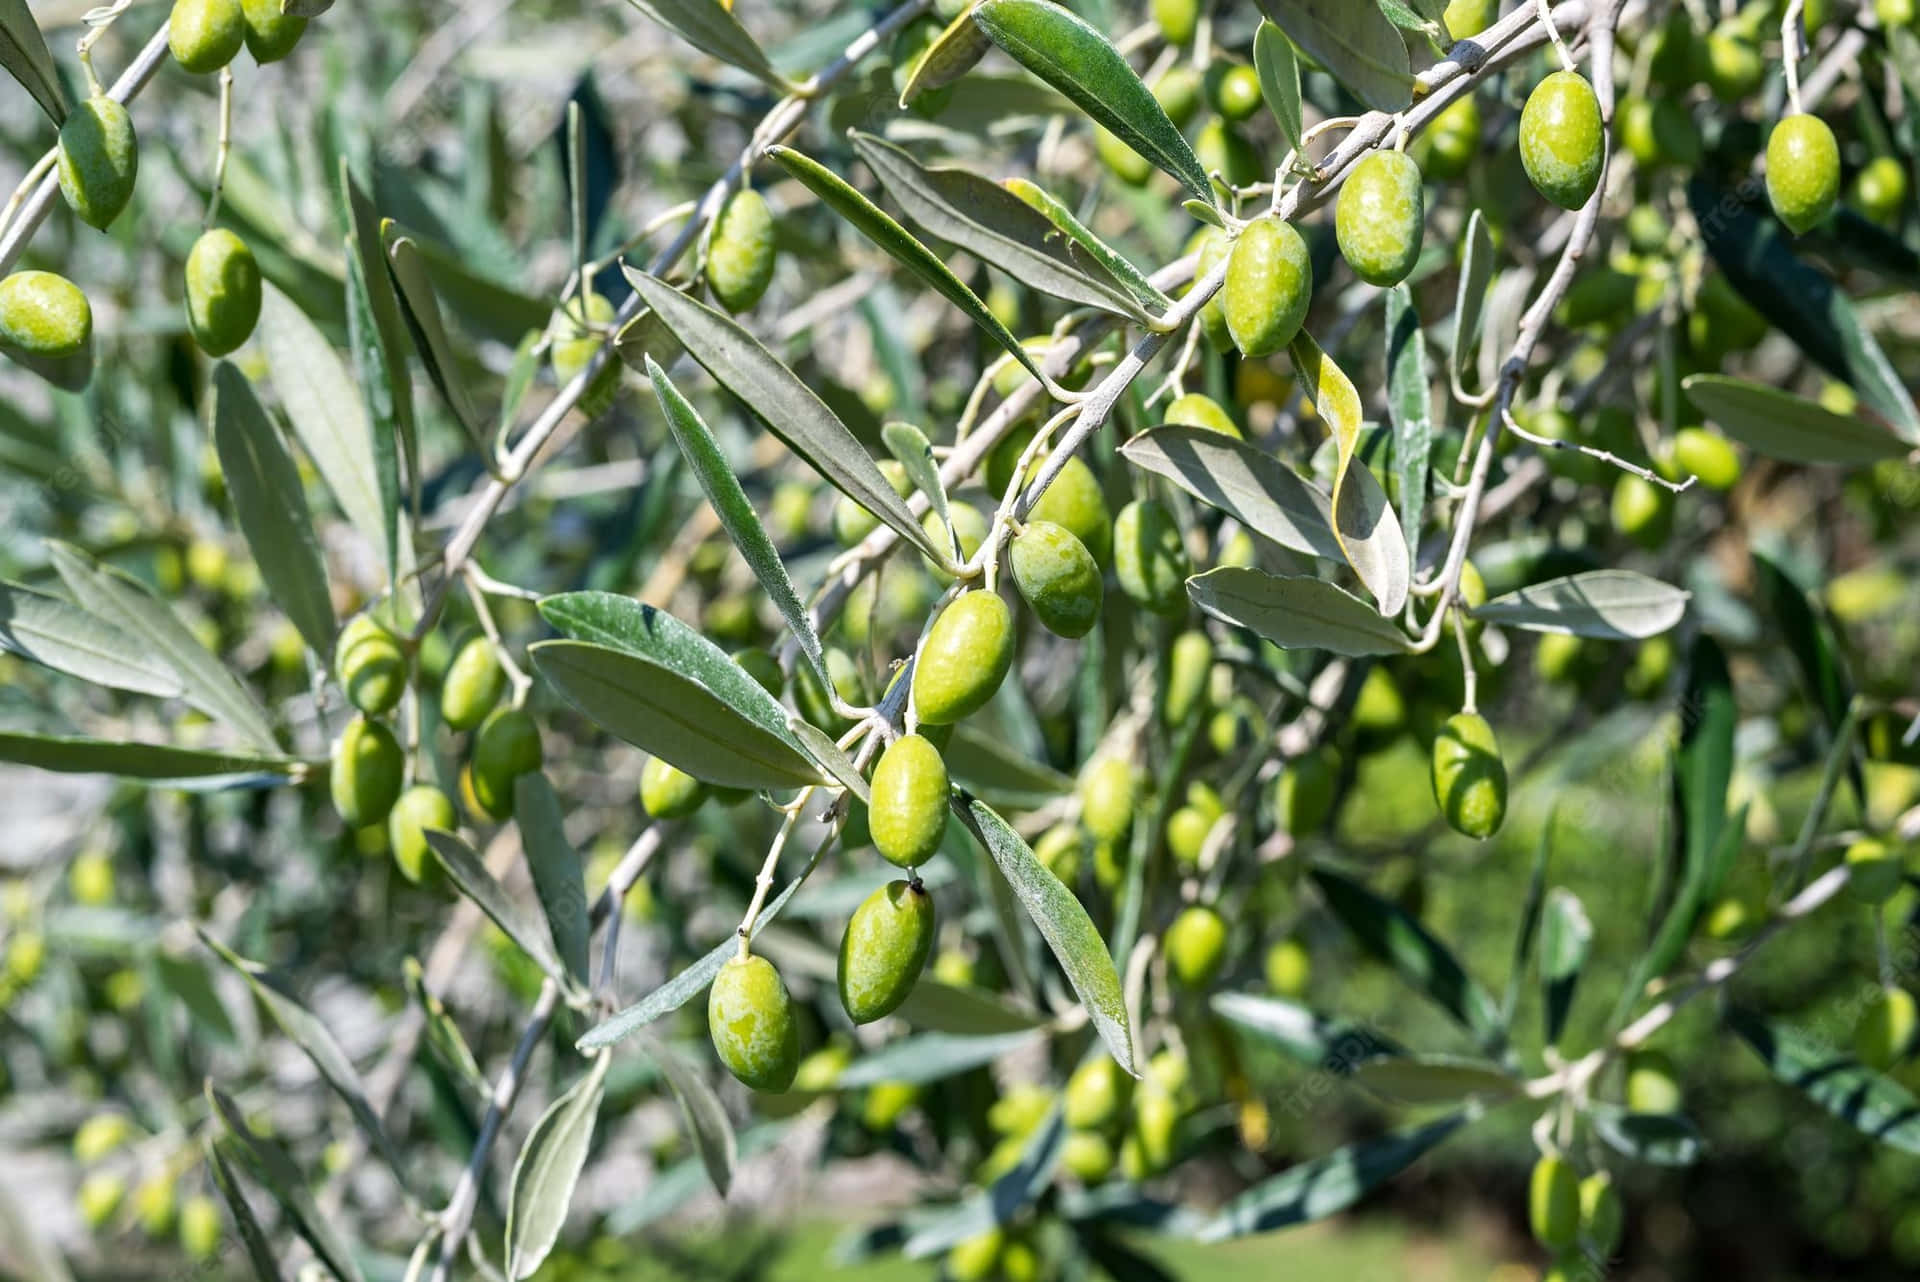 The Olive Tree stands as a symbol of strength, resilience and renewal. Wallpaper